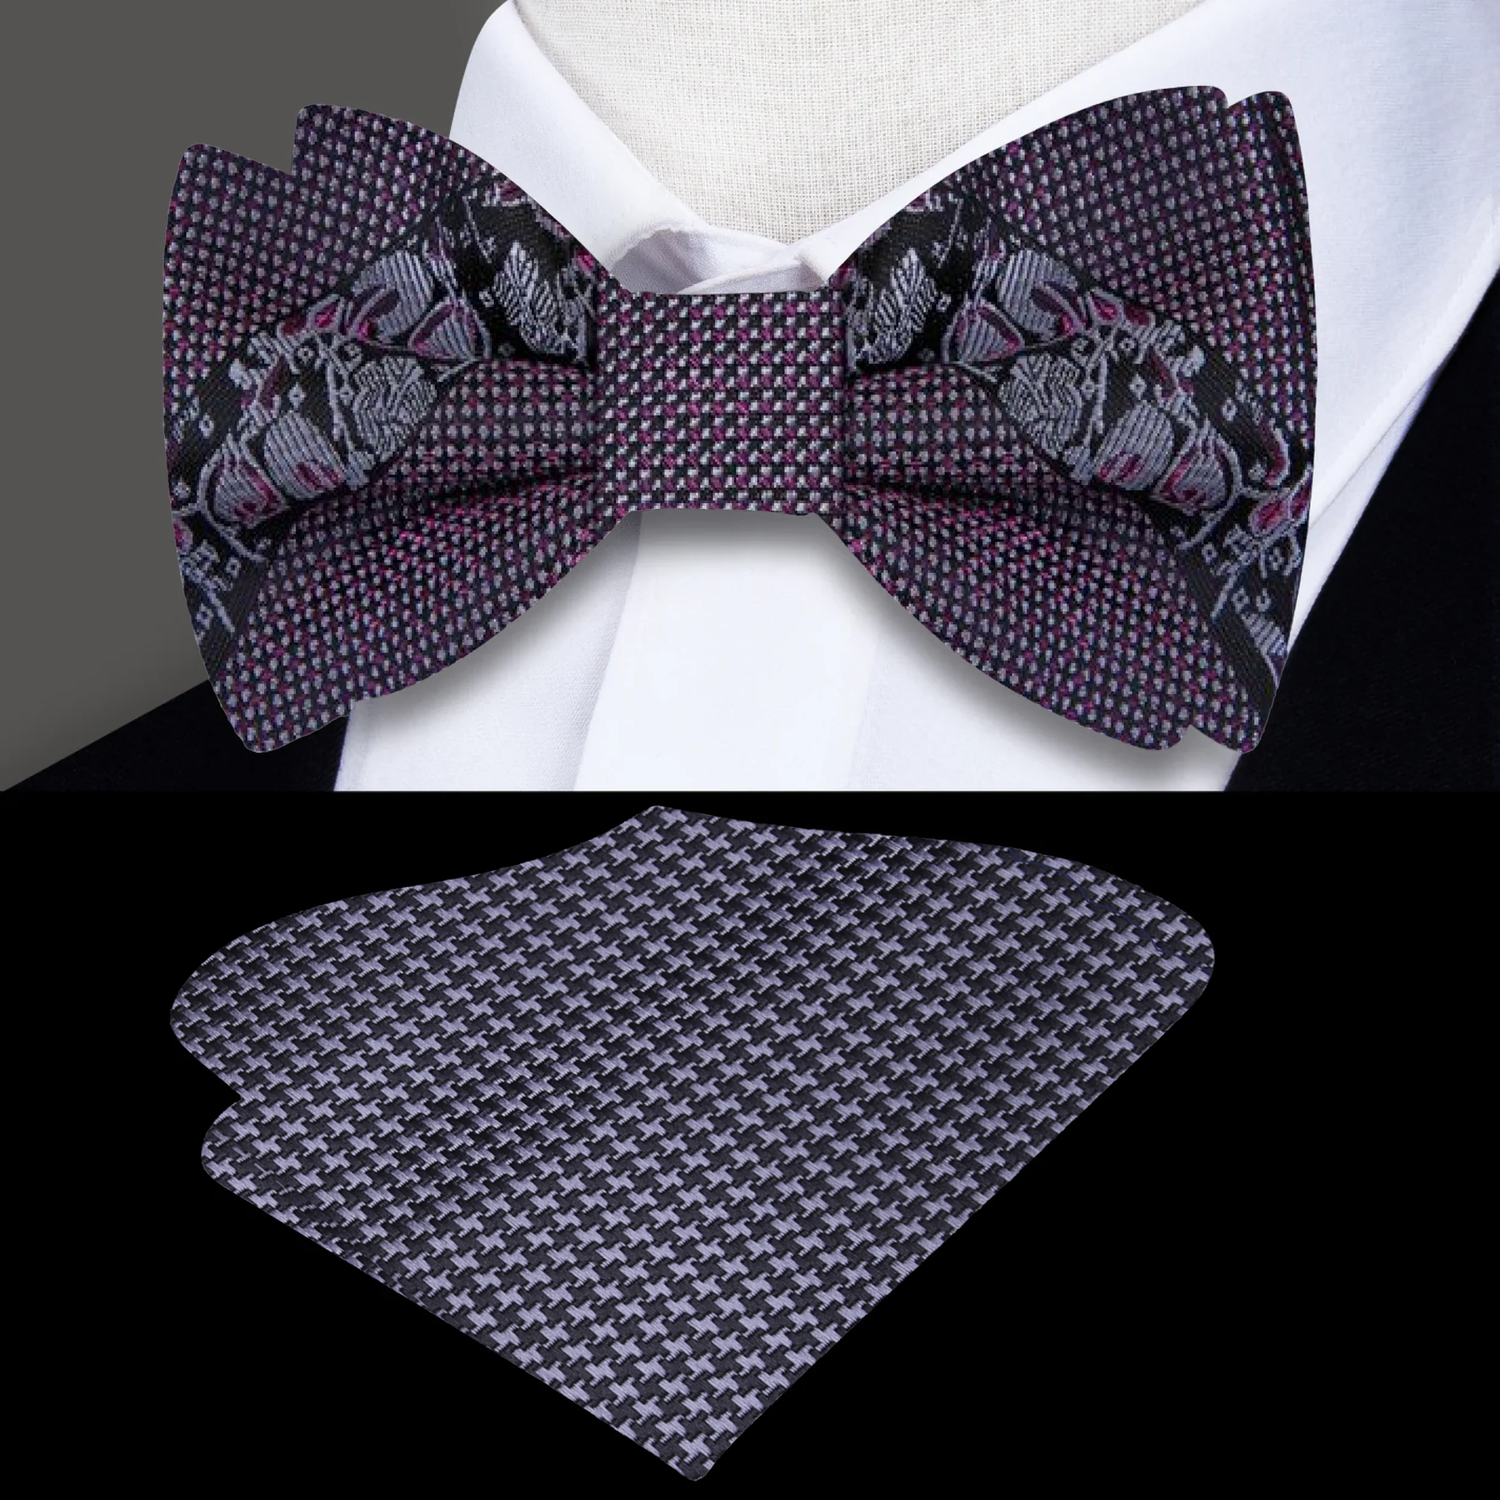 Metallic Purple Black Floral Bow Tie and Accenting Square